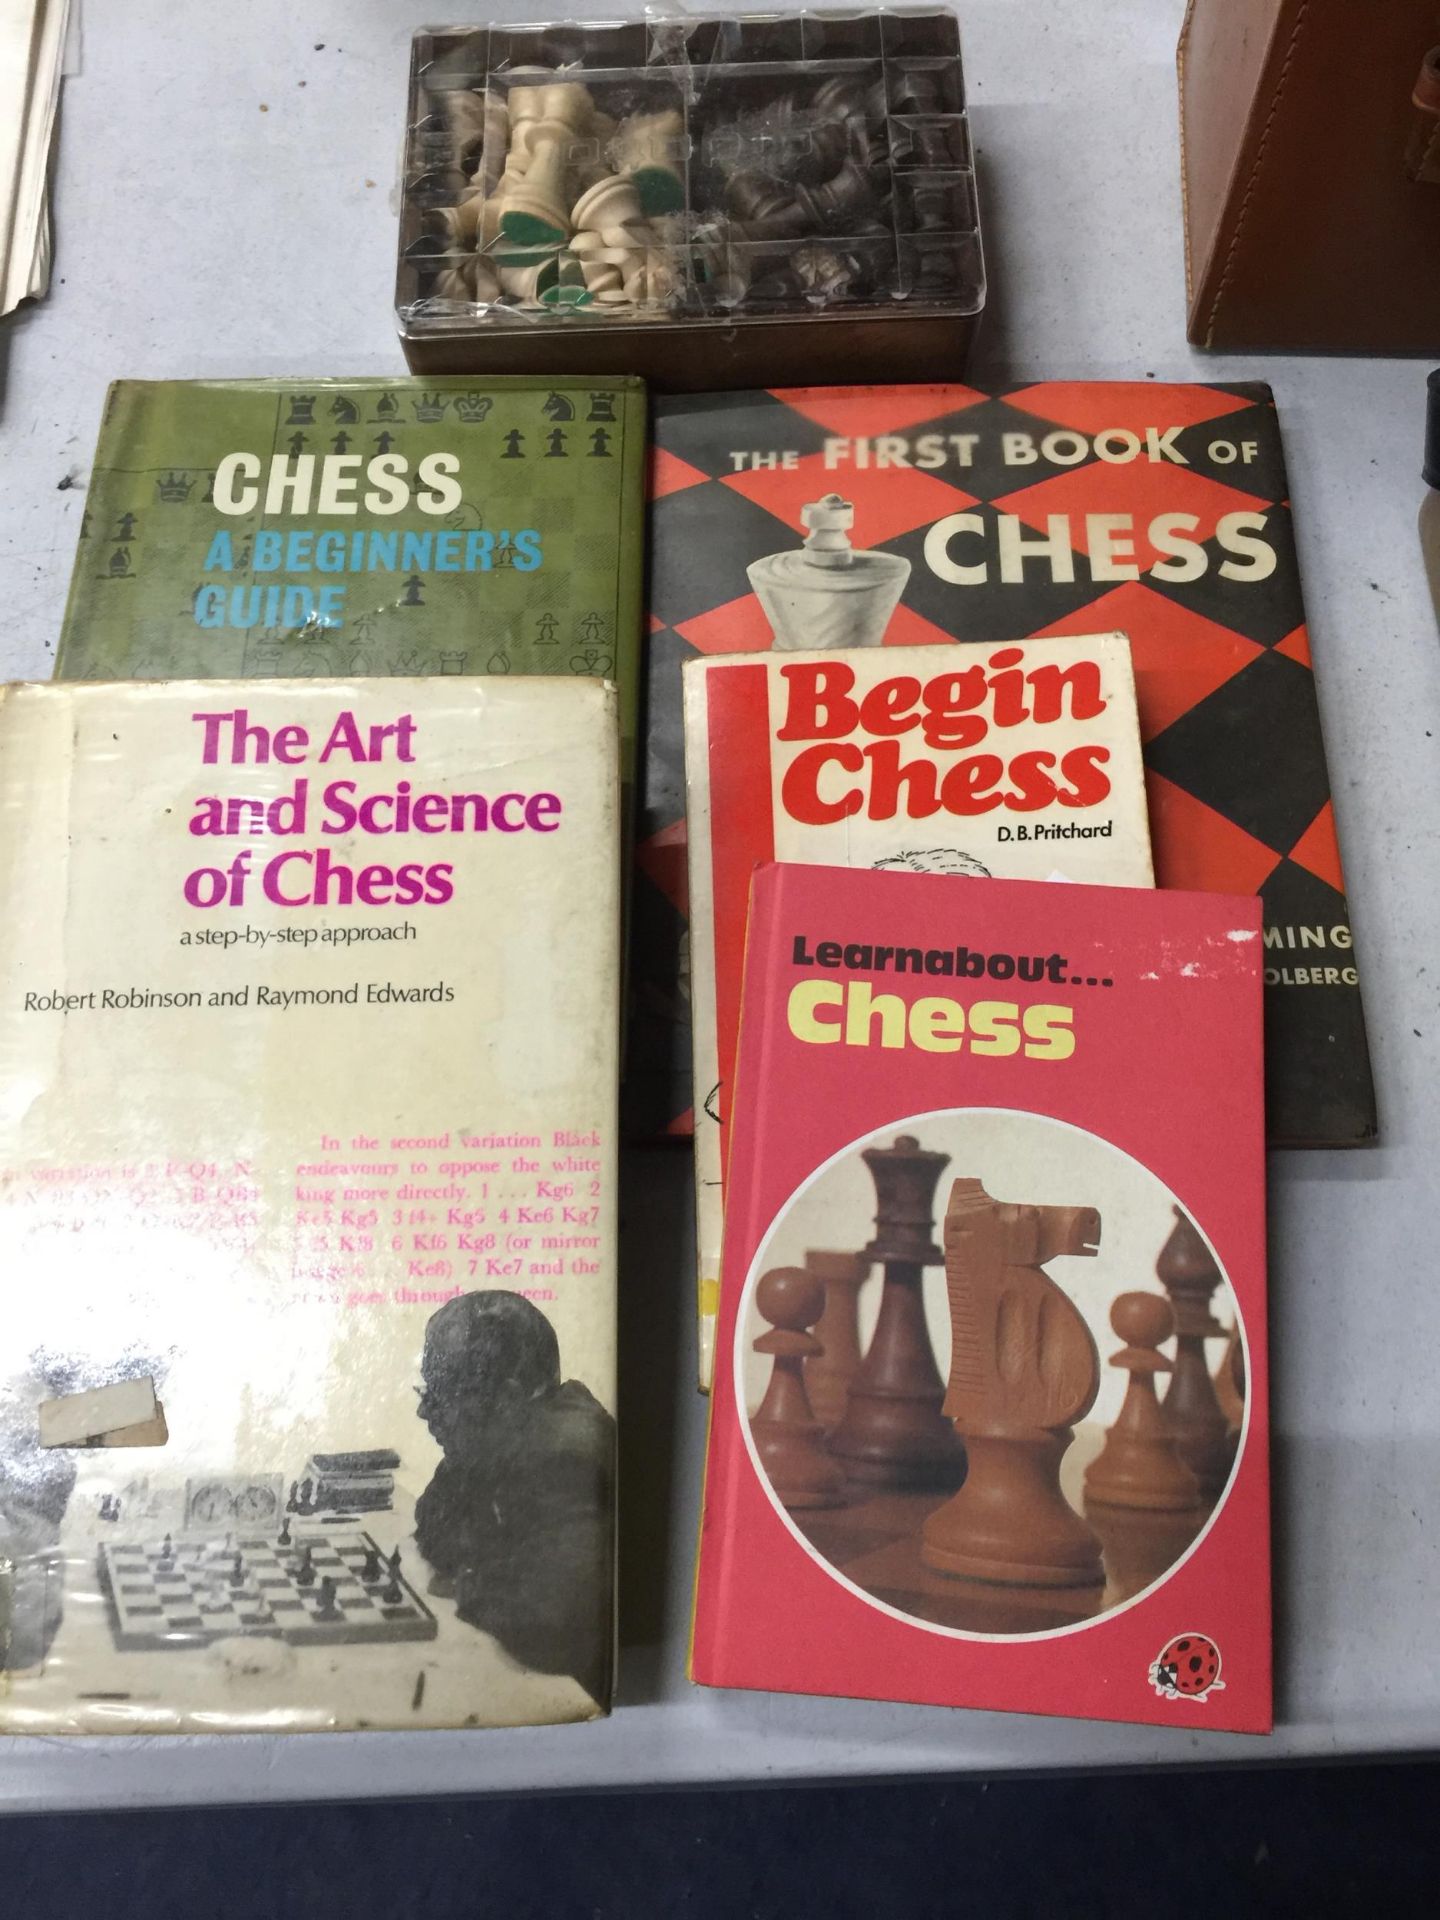 A COLLECTION OF CHESS BOOKS AND BOXED CHESS PIECES